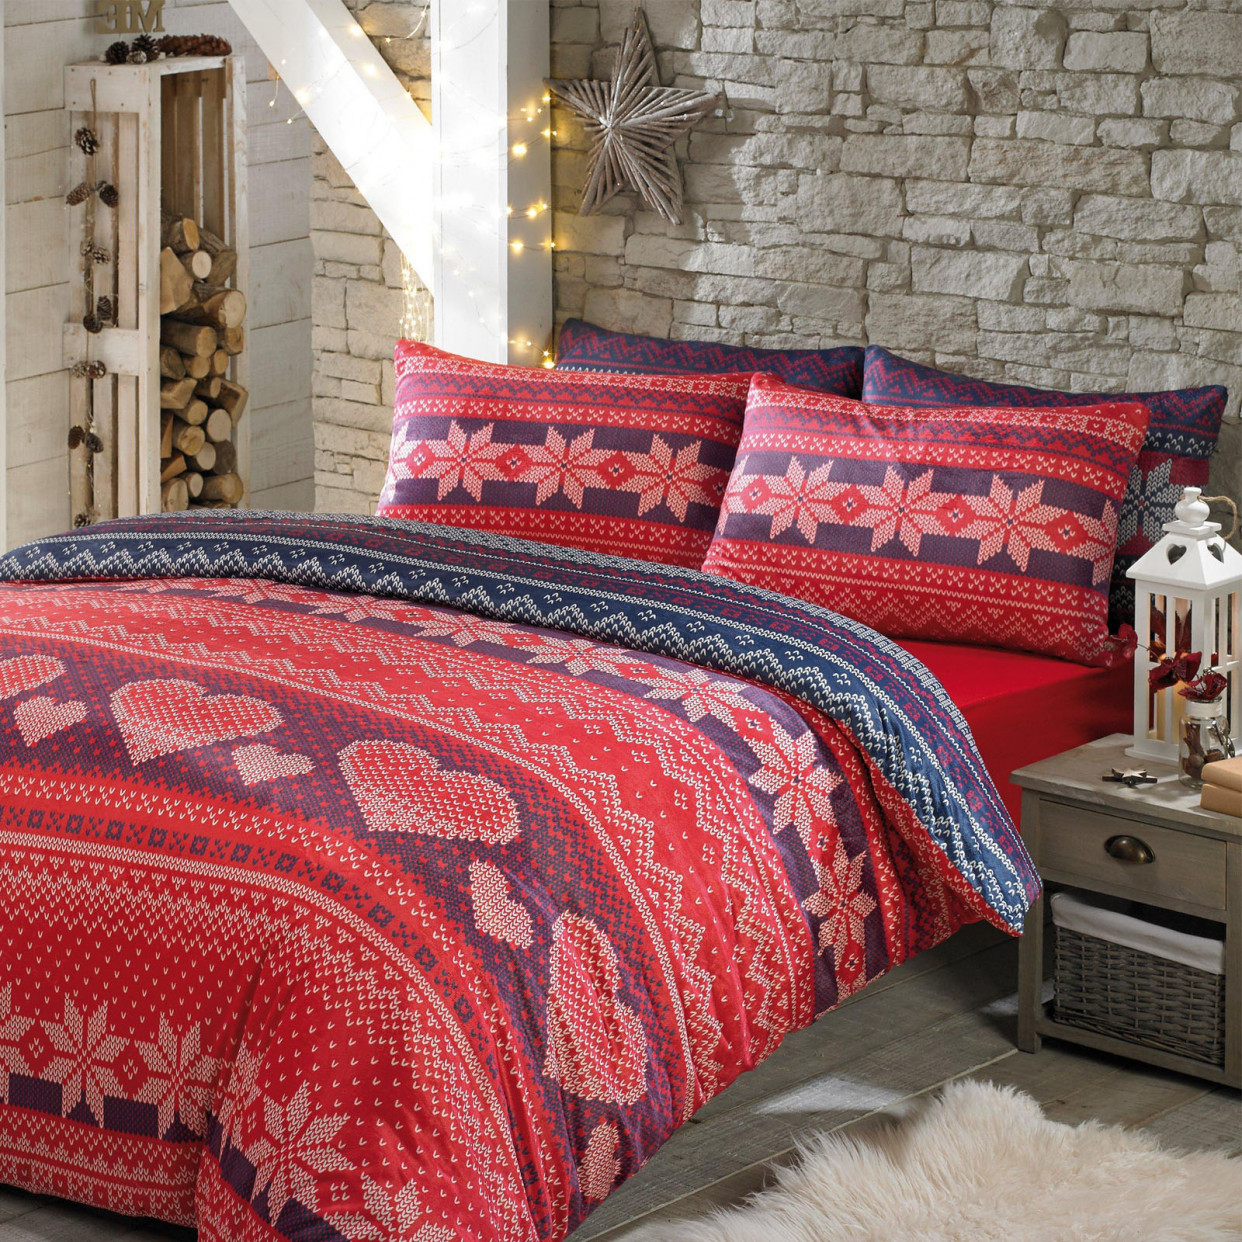 Nordic Duvet Cover Bedding Set Soft Touch Print, Red Navy - King>